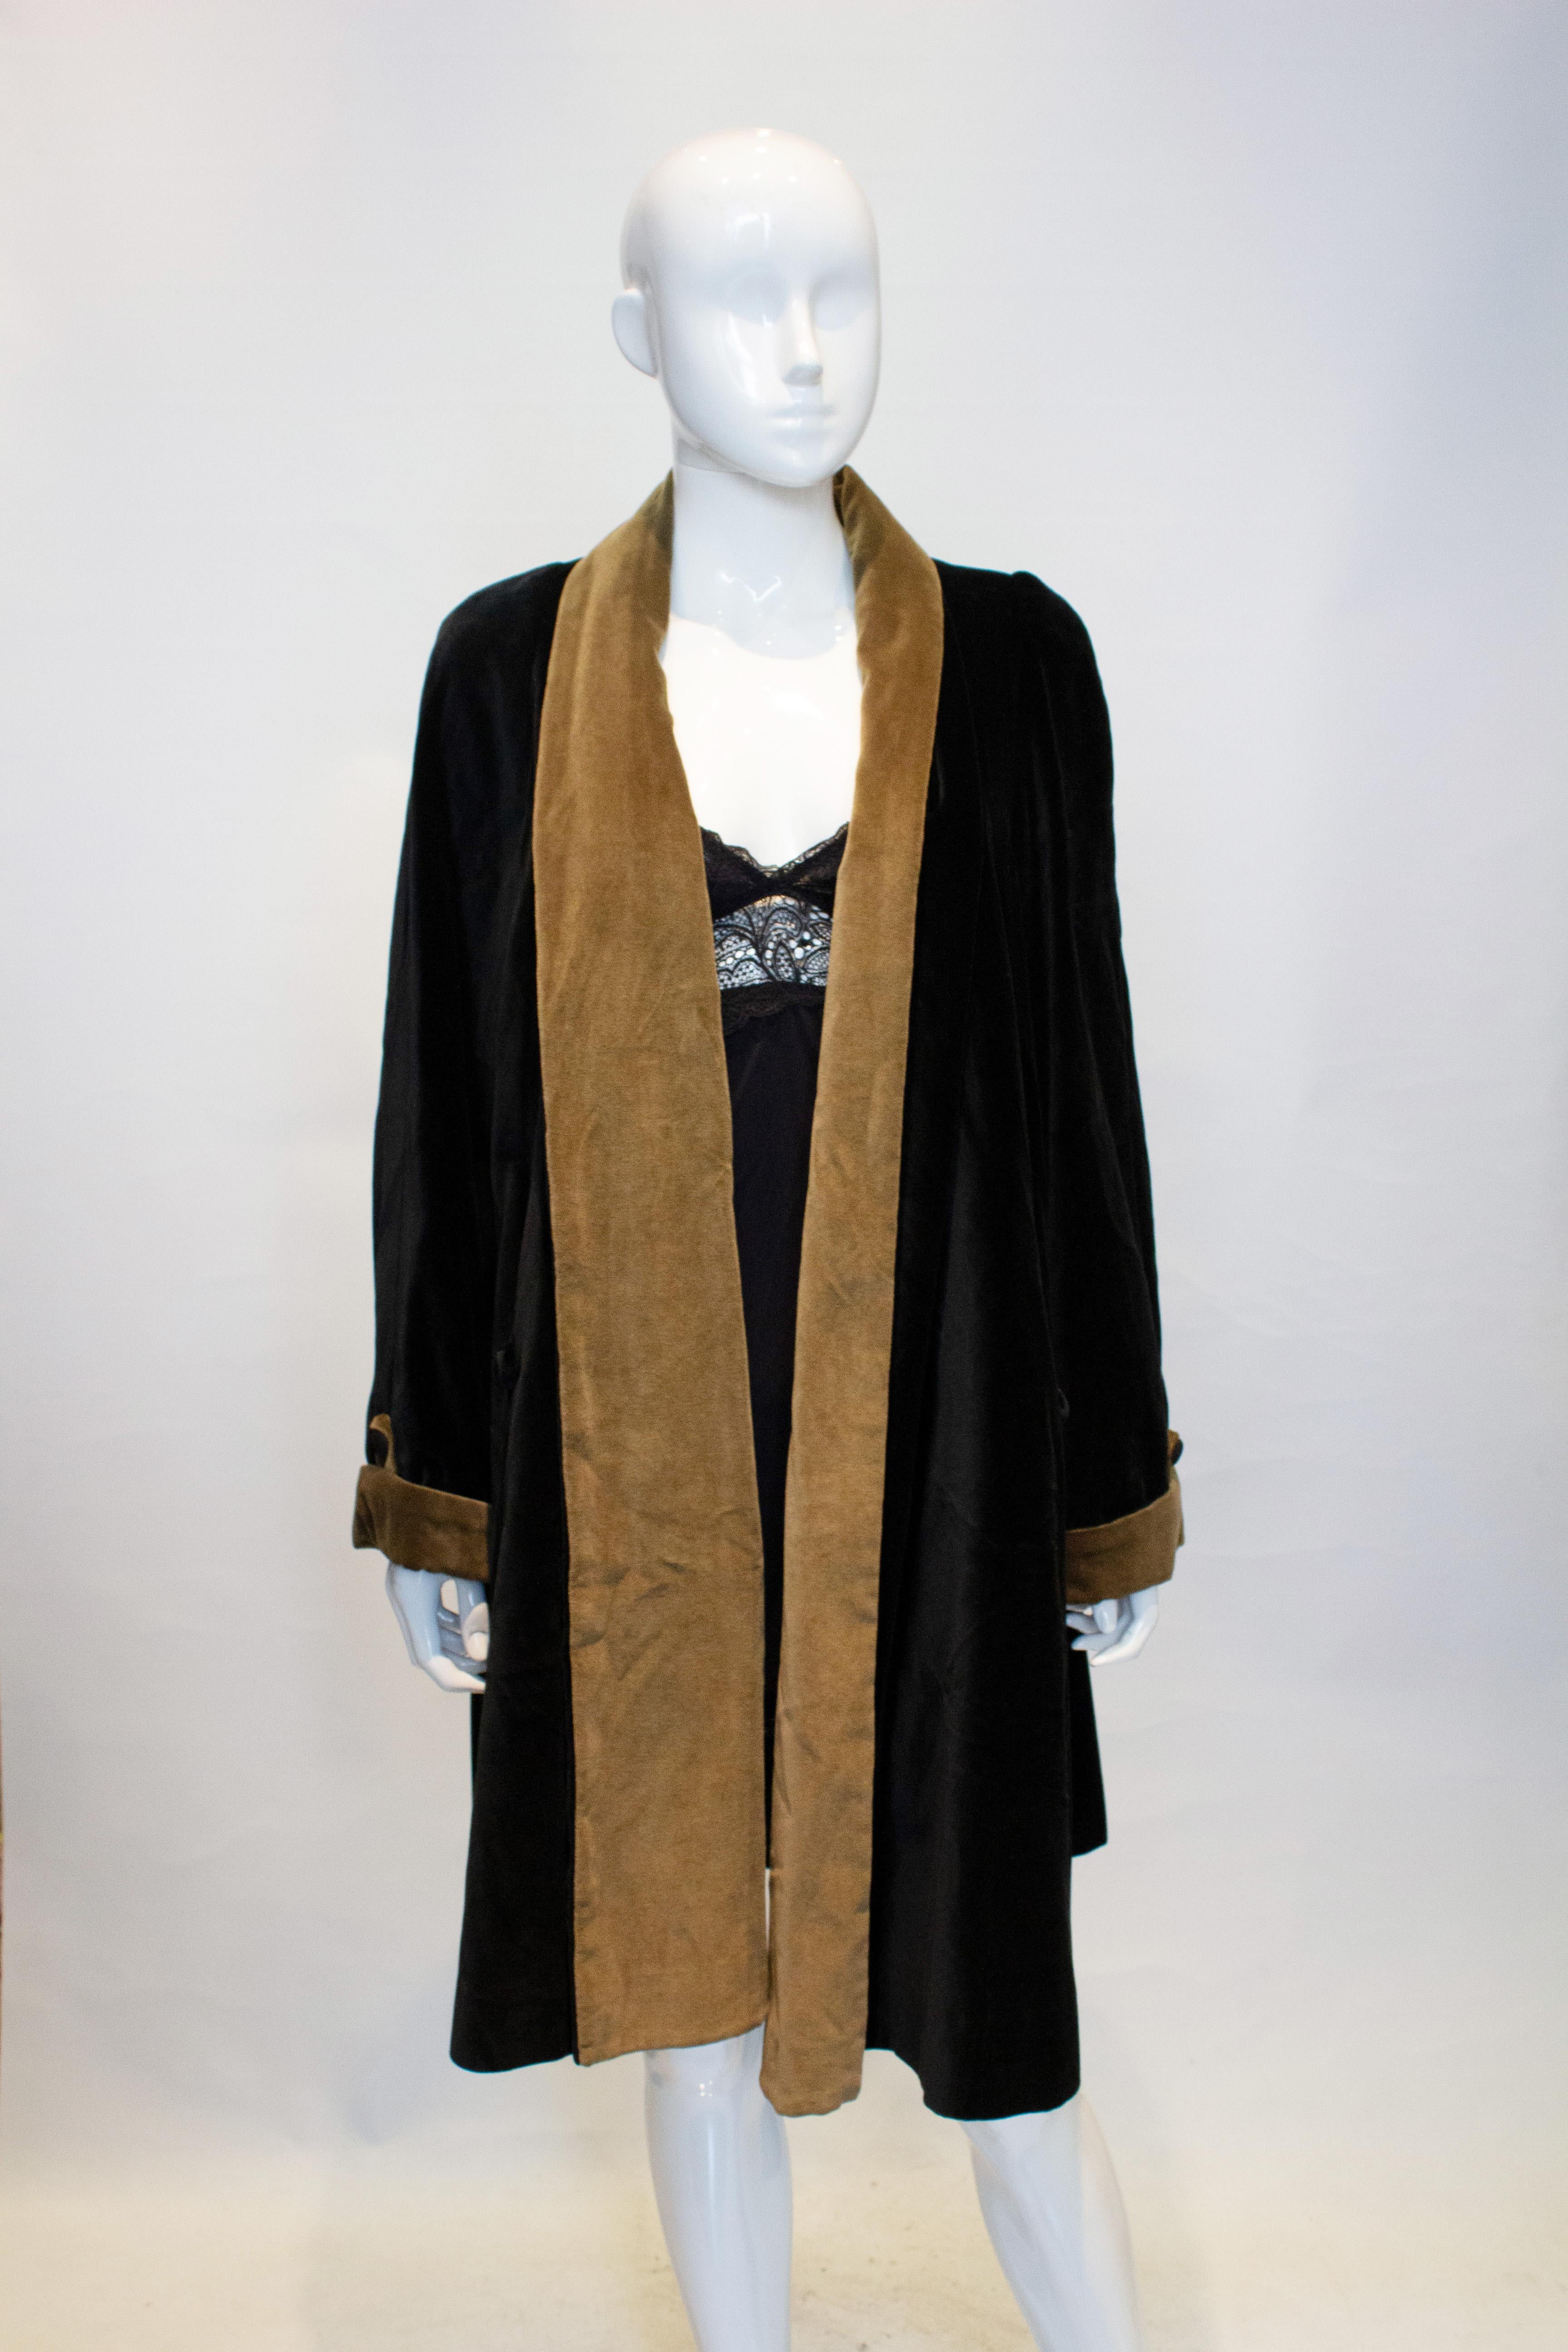 A wonderful vintage velvet coat by Holroyde. In black with a sage green collar and cuffs, with wonderful detail. The coat is A line , fully lined and hangs beautifully.
Measurements: Bust up to 42'', length 43''